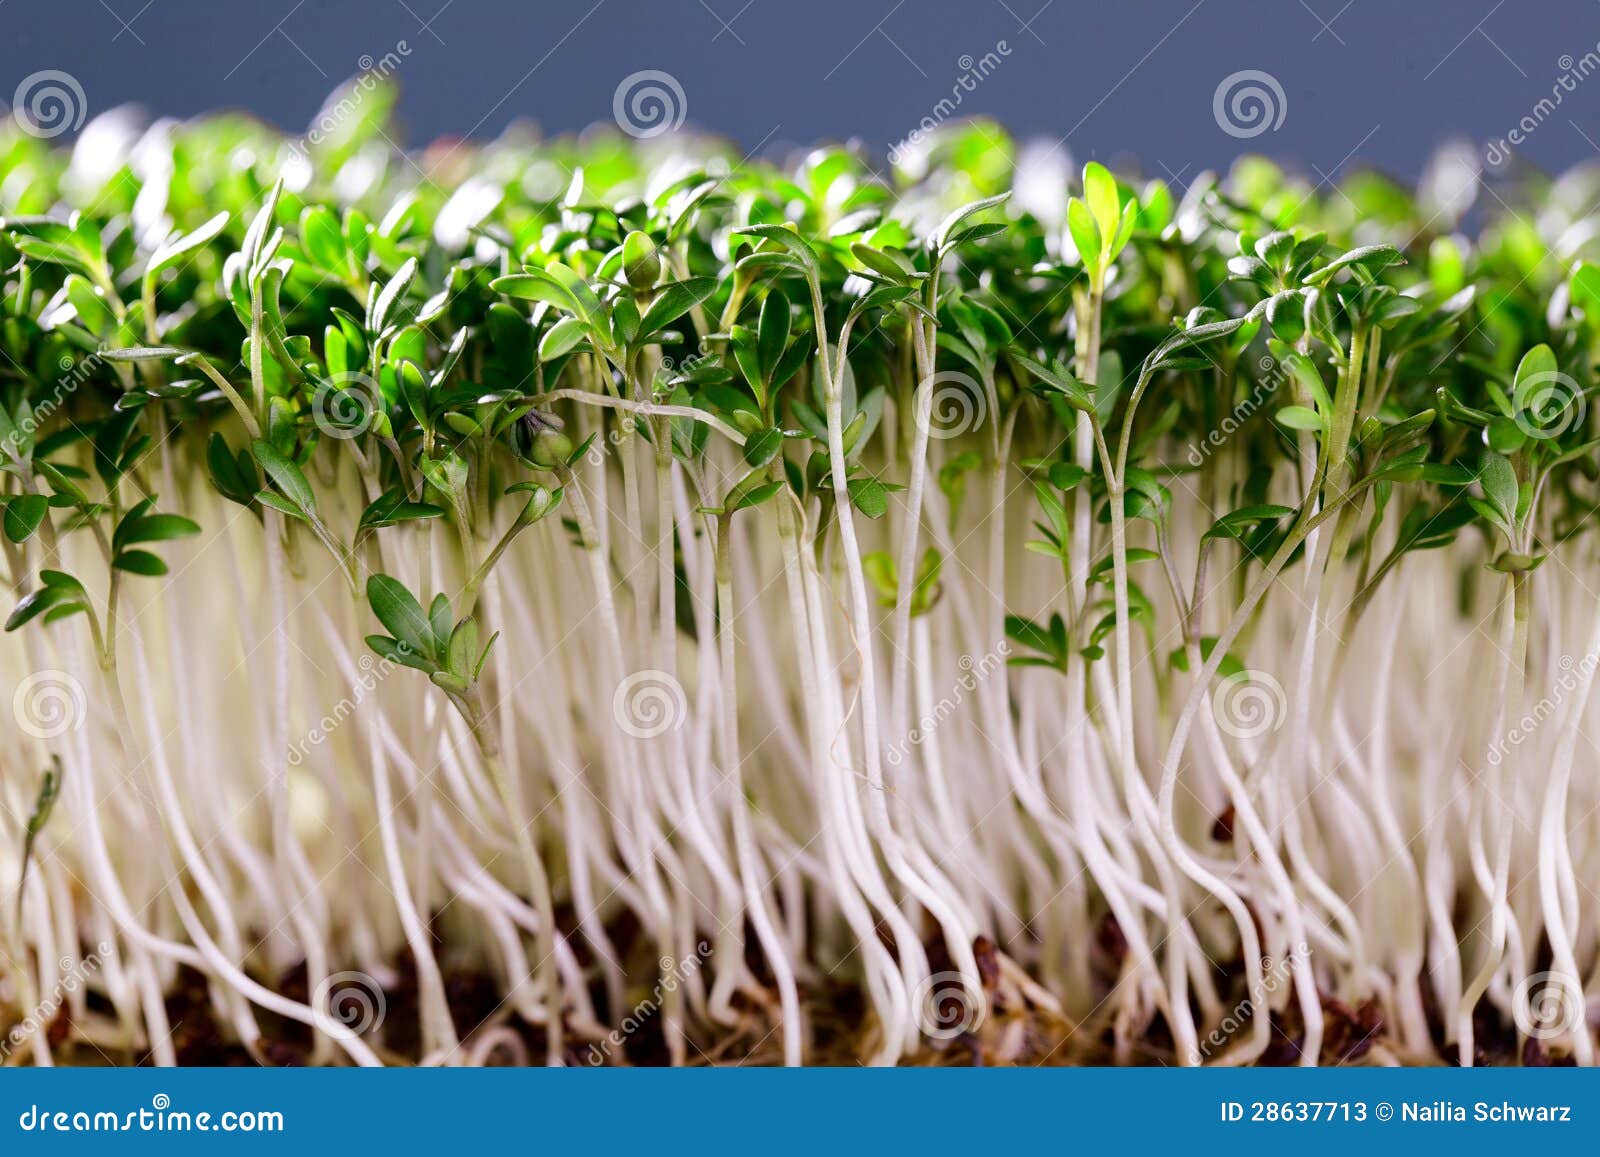 Garden Cress Stock Photos and Pictures - 15,479 Images